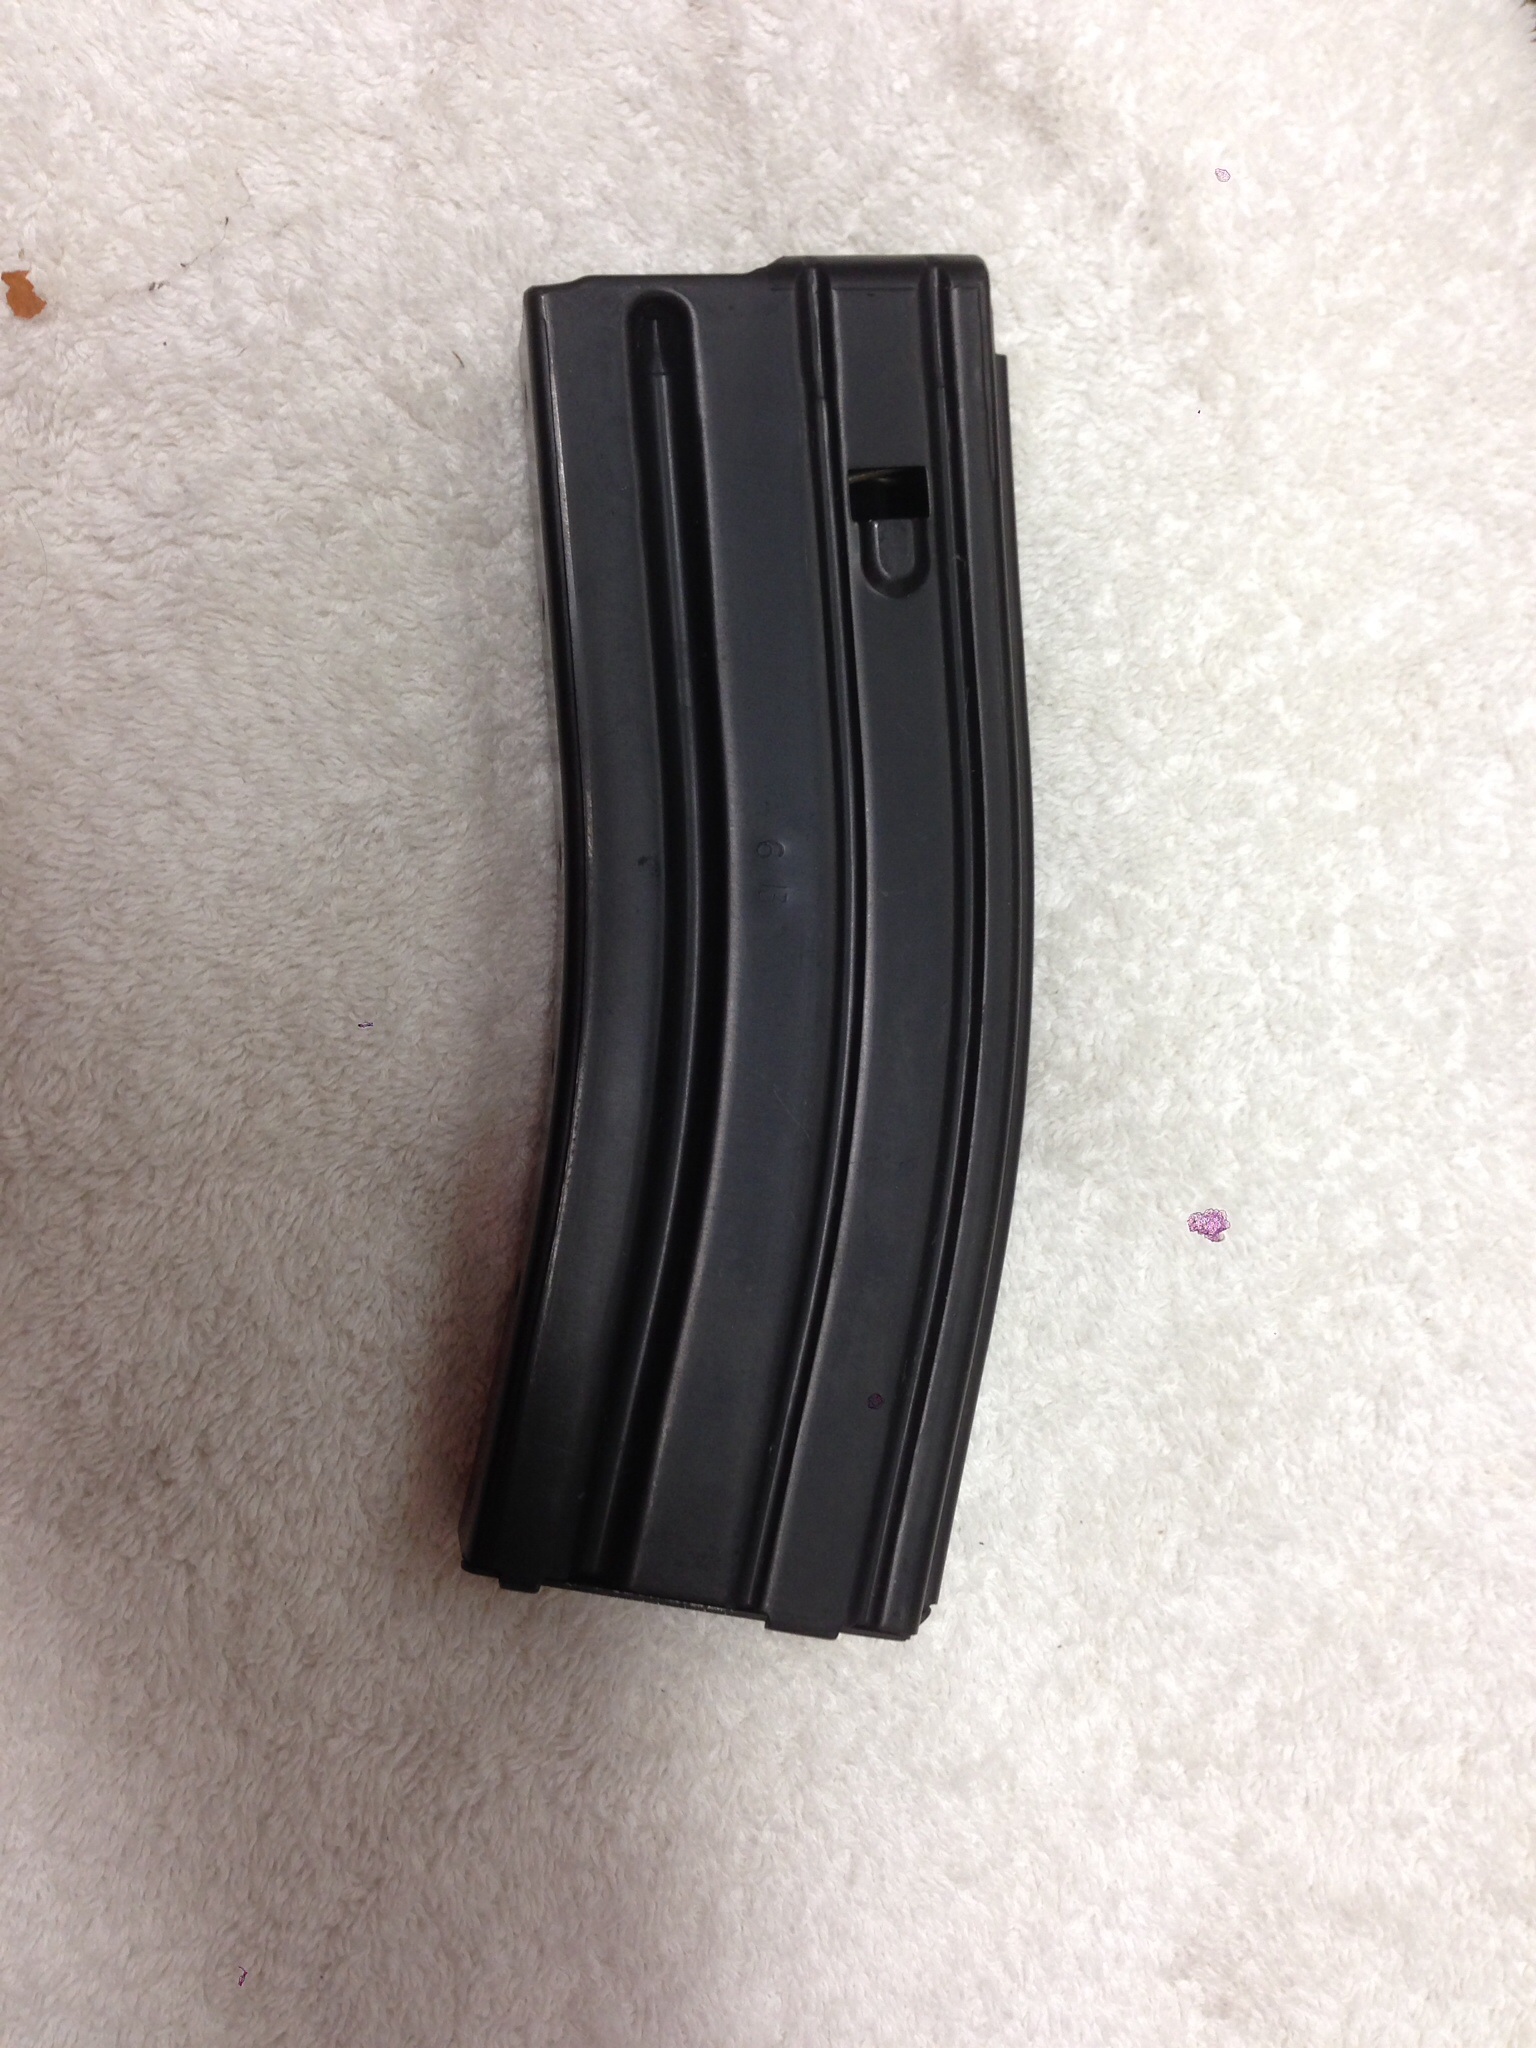 Mag with Magpul innards